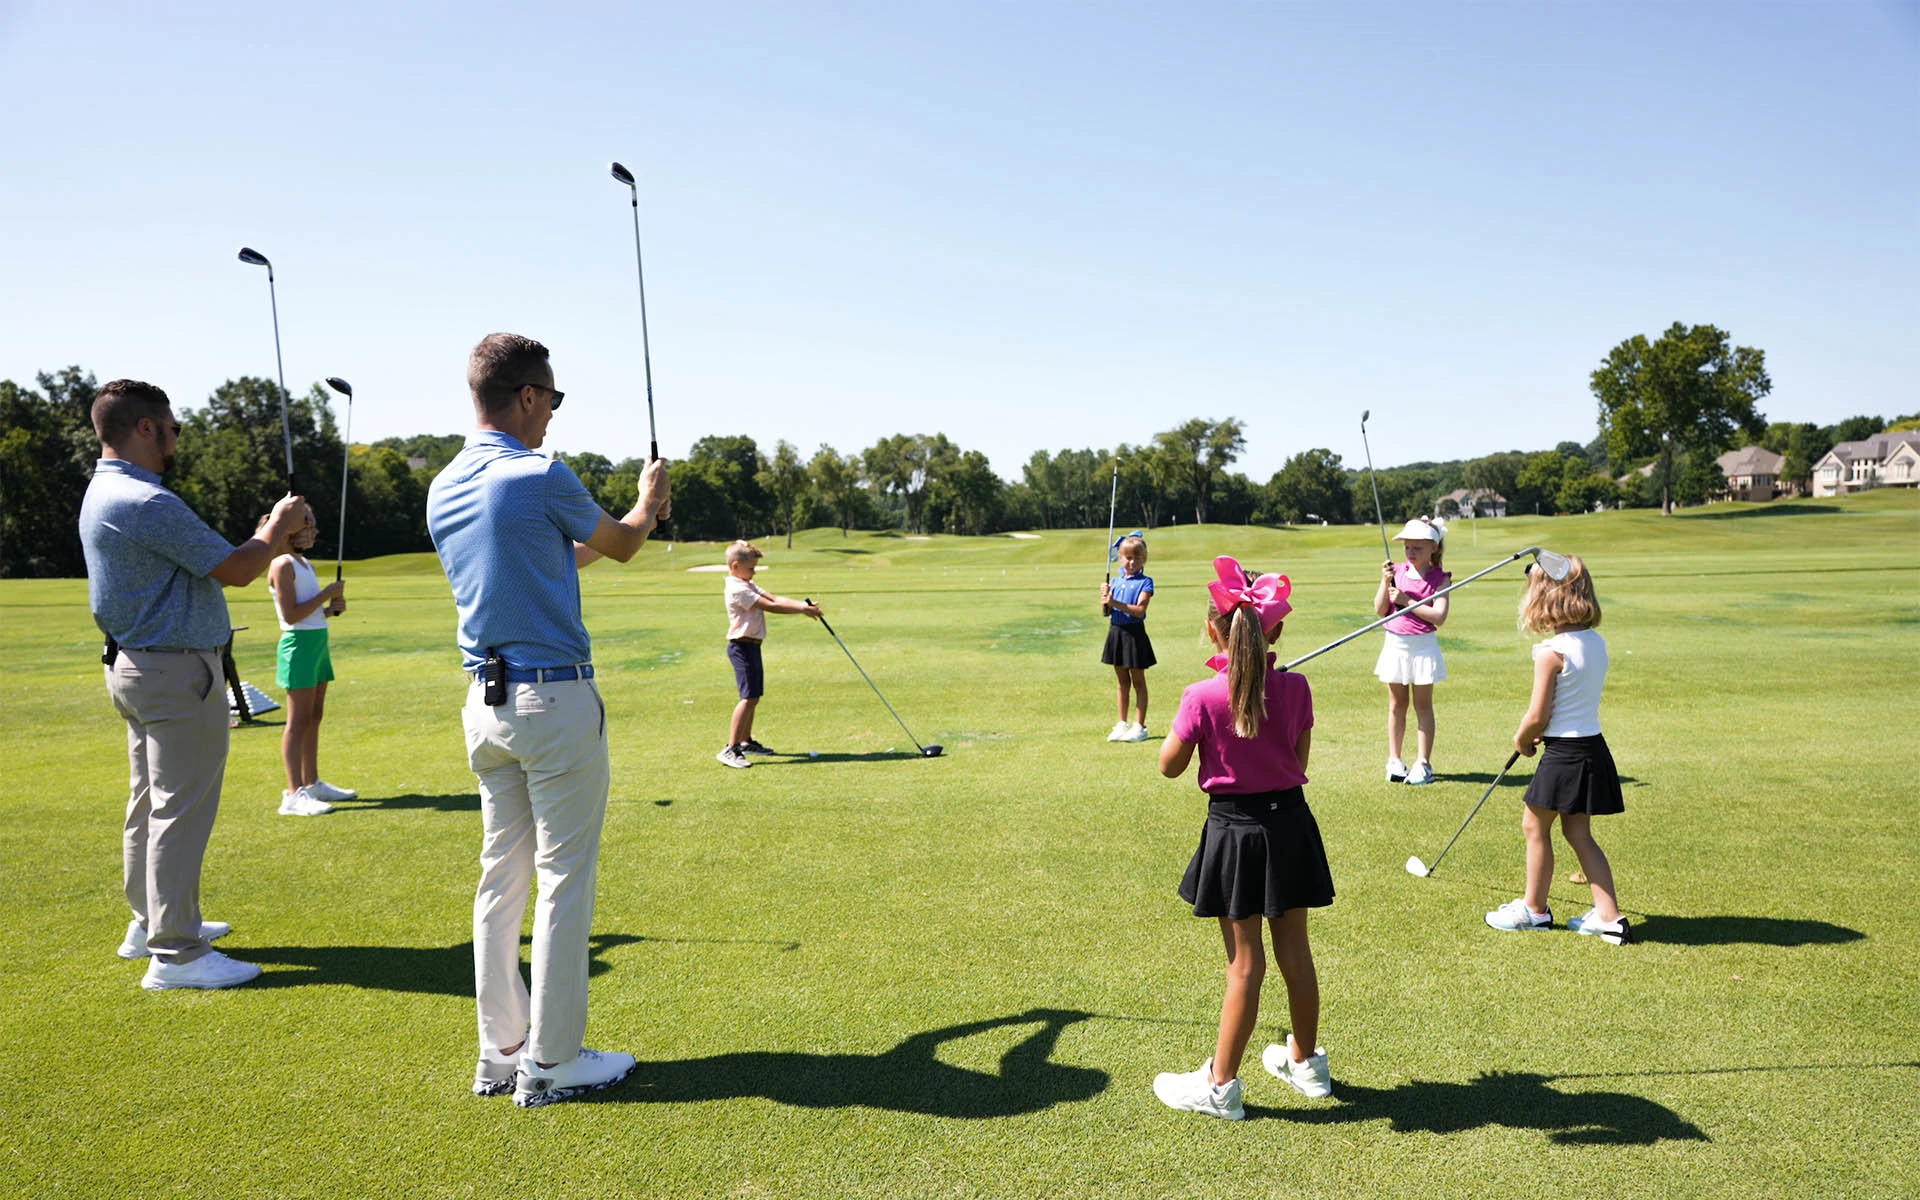 Invited Crush It! Junior Golf Clinic in action: Expert coaches guiding young children in learning the golf grip on an Invited Club driving range